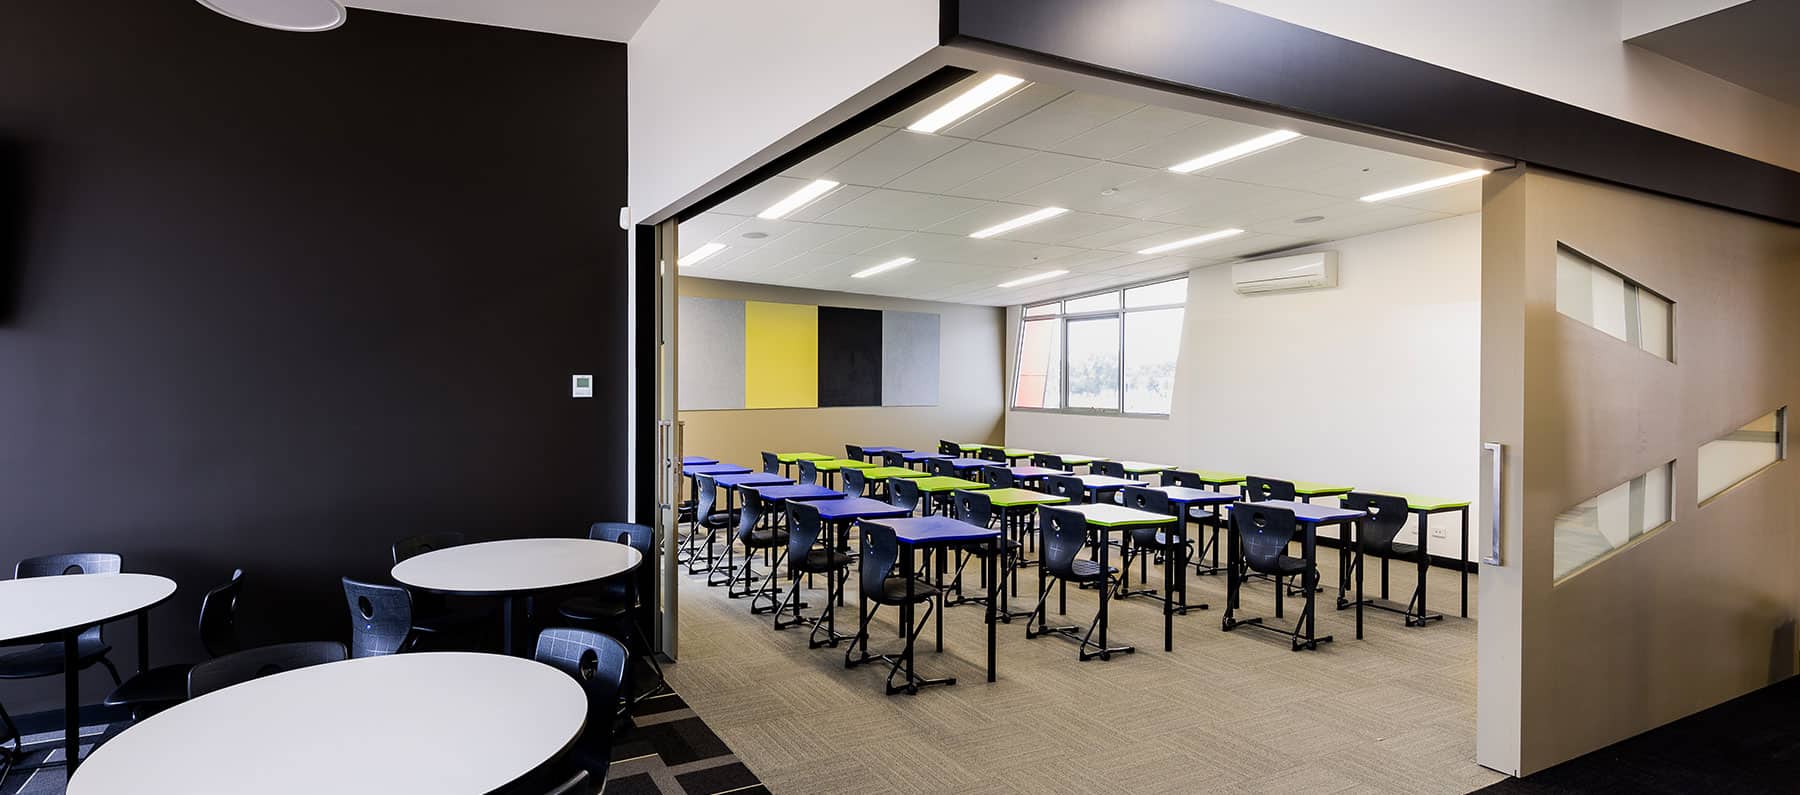 A500-Lutheran-College-classroom-1800x795